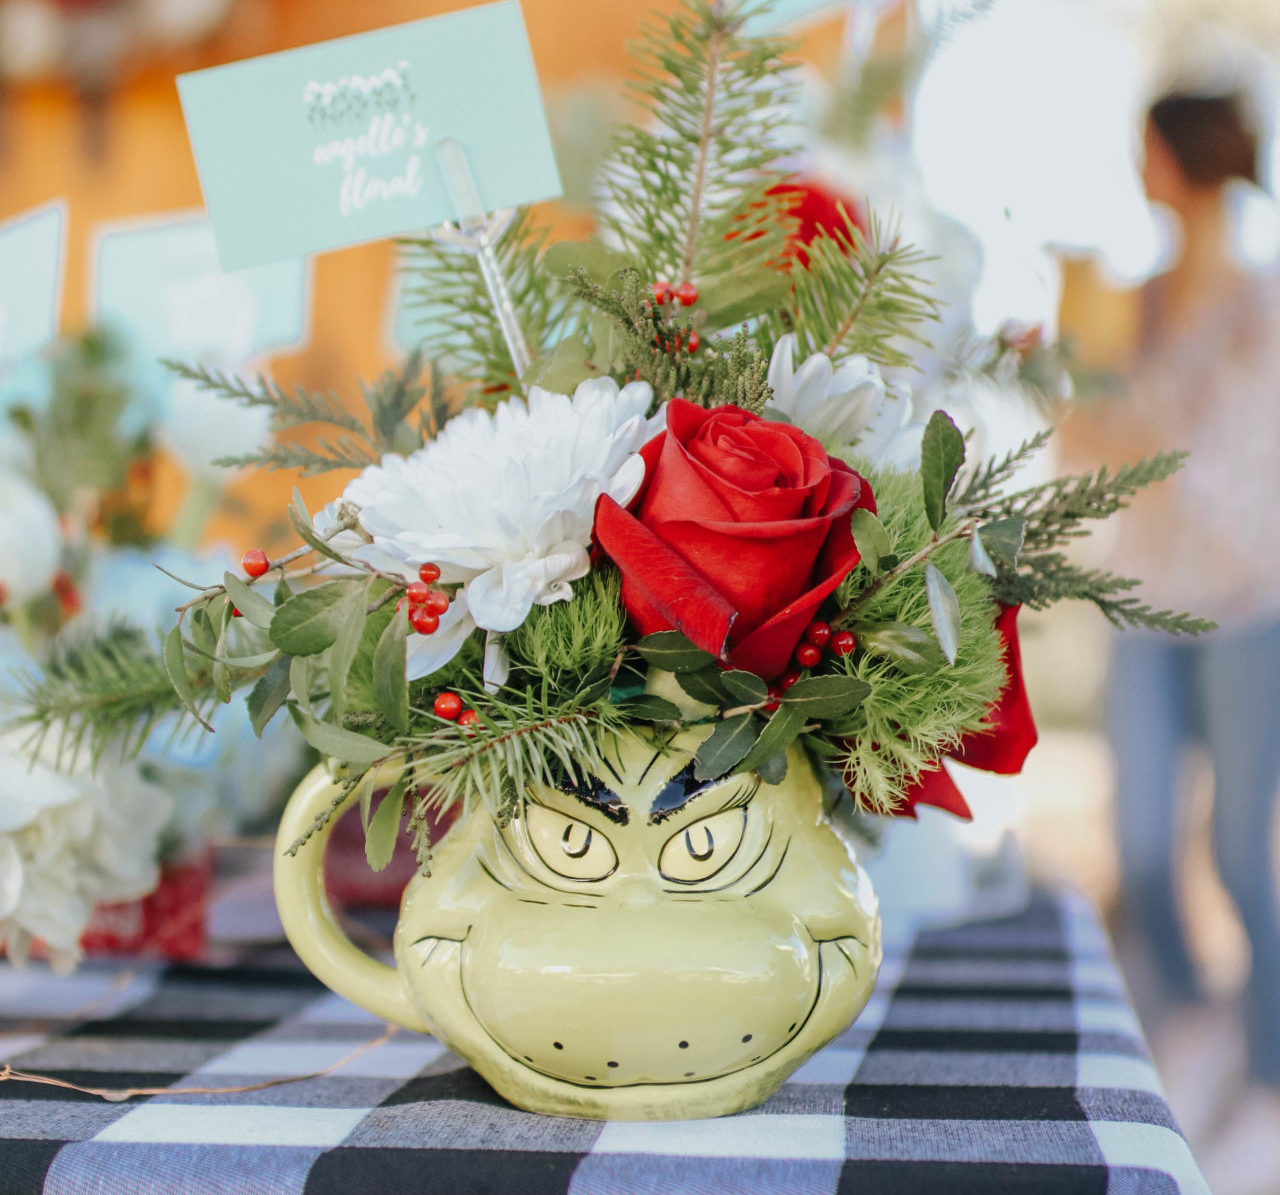 grinch coffee mug filled with flowers